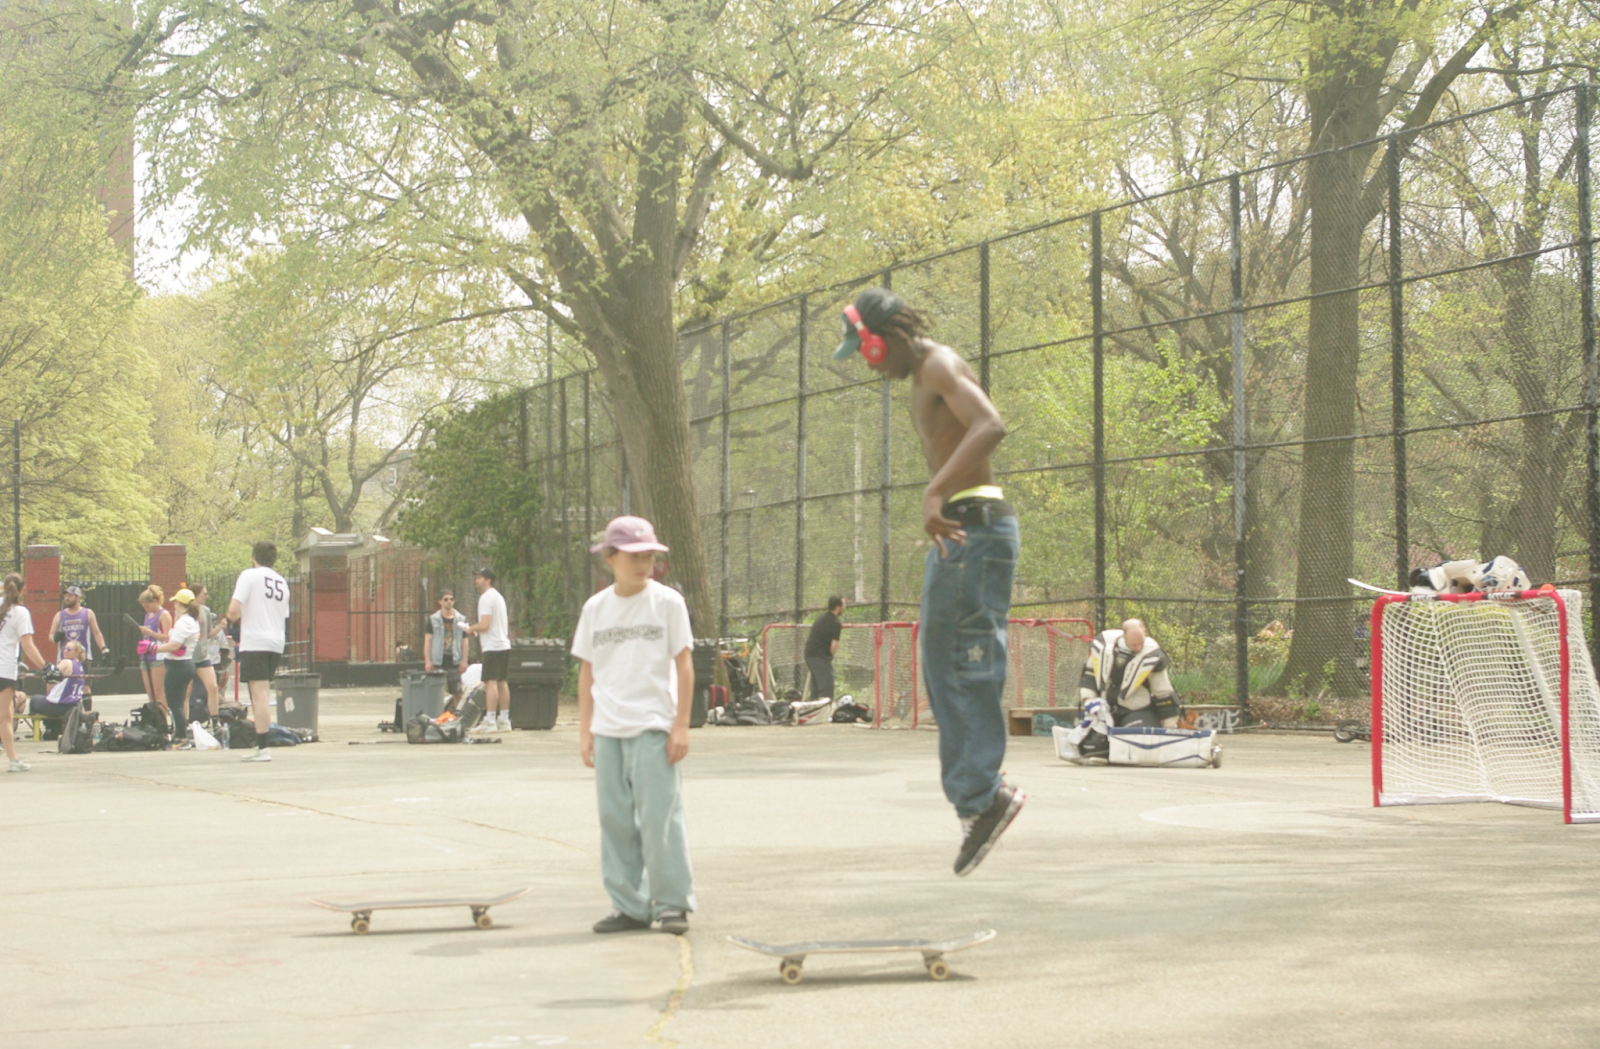 Two kids skating in a park.